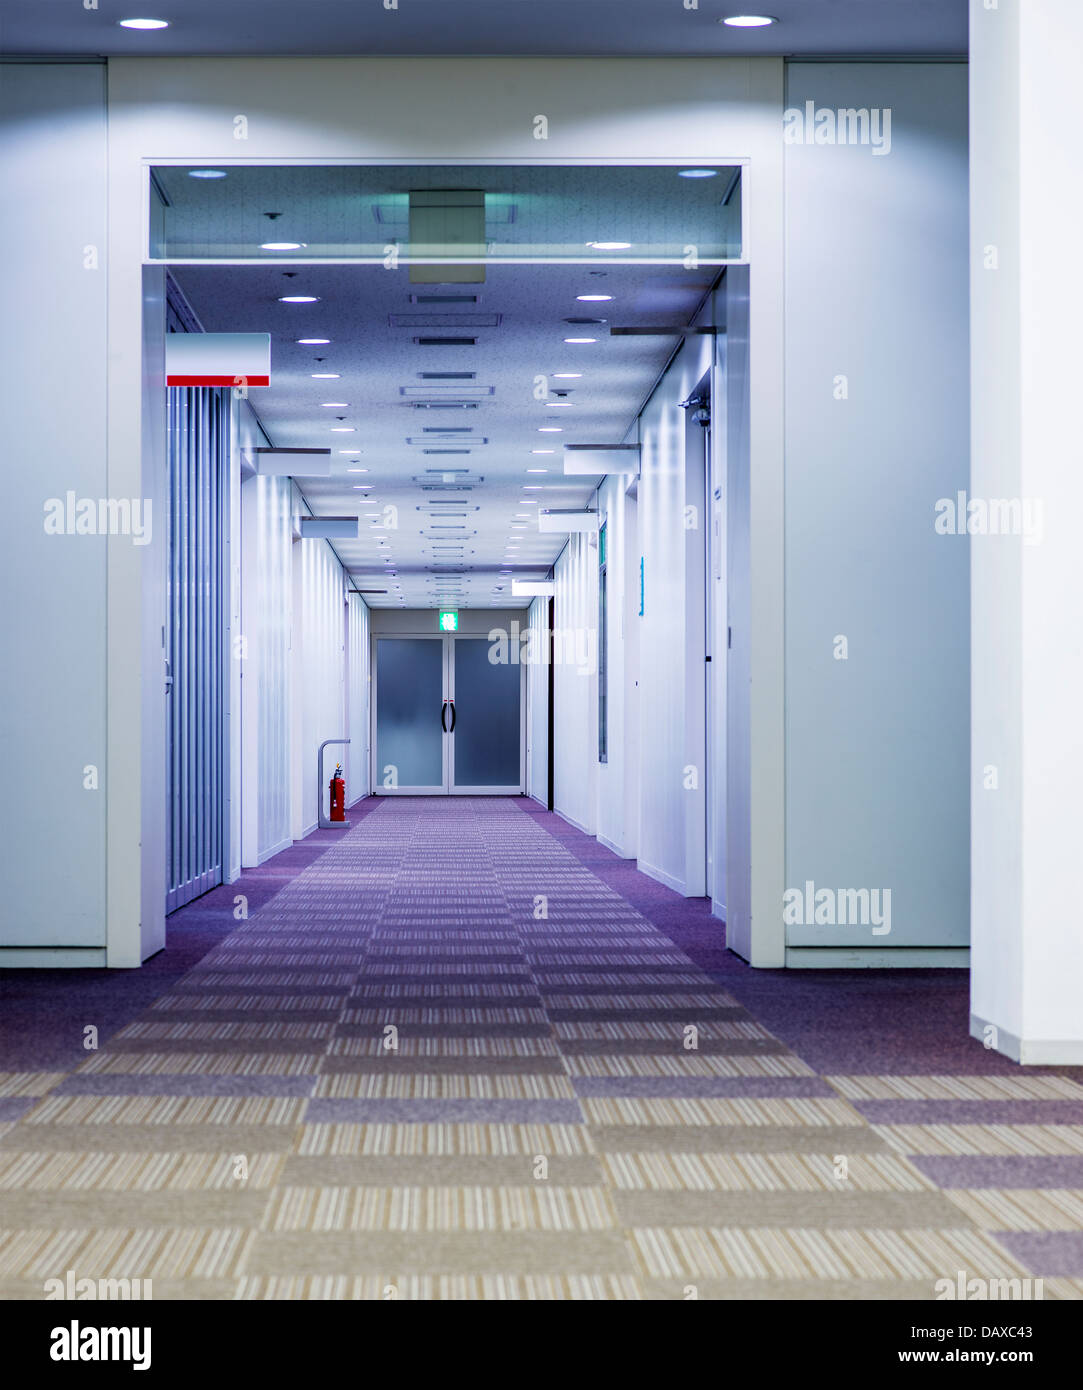 Hallway in an office building. Stock Photo